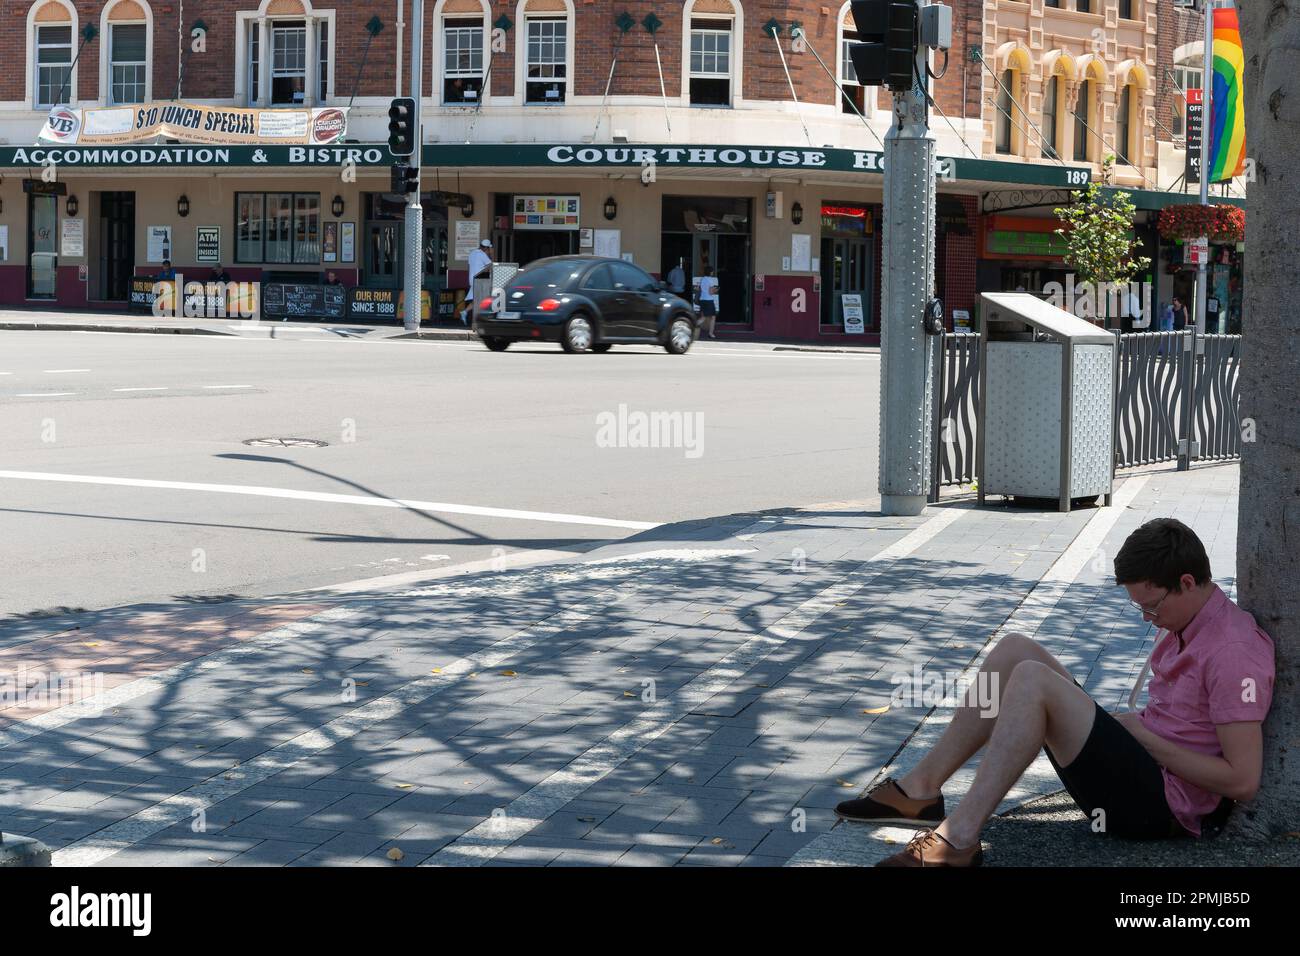 Sydney Australia - January 26 2011; person in pink shirt sits on ground under tree on side of Oxford Street across road from Courthouse Hotel. Stock Photo